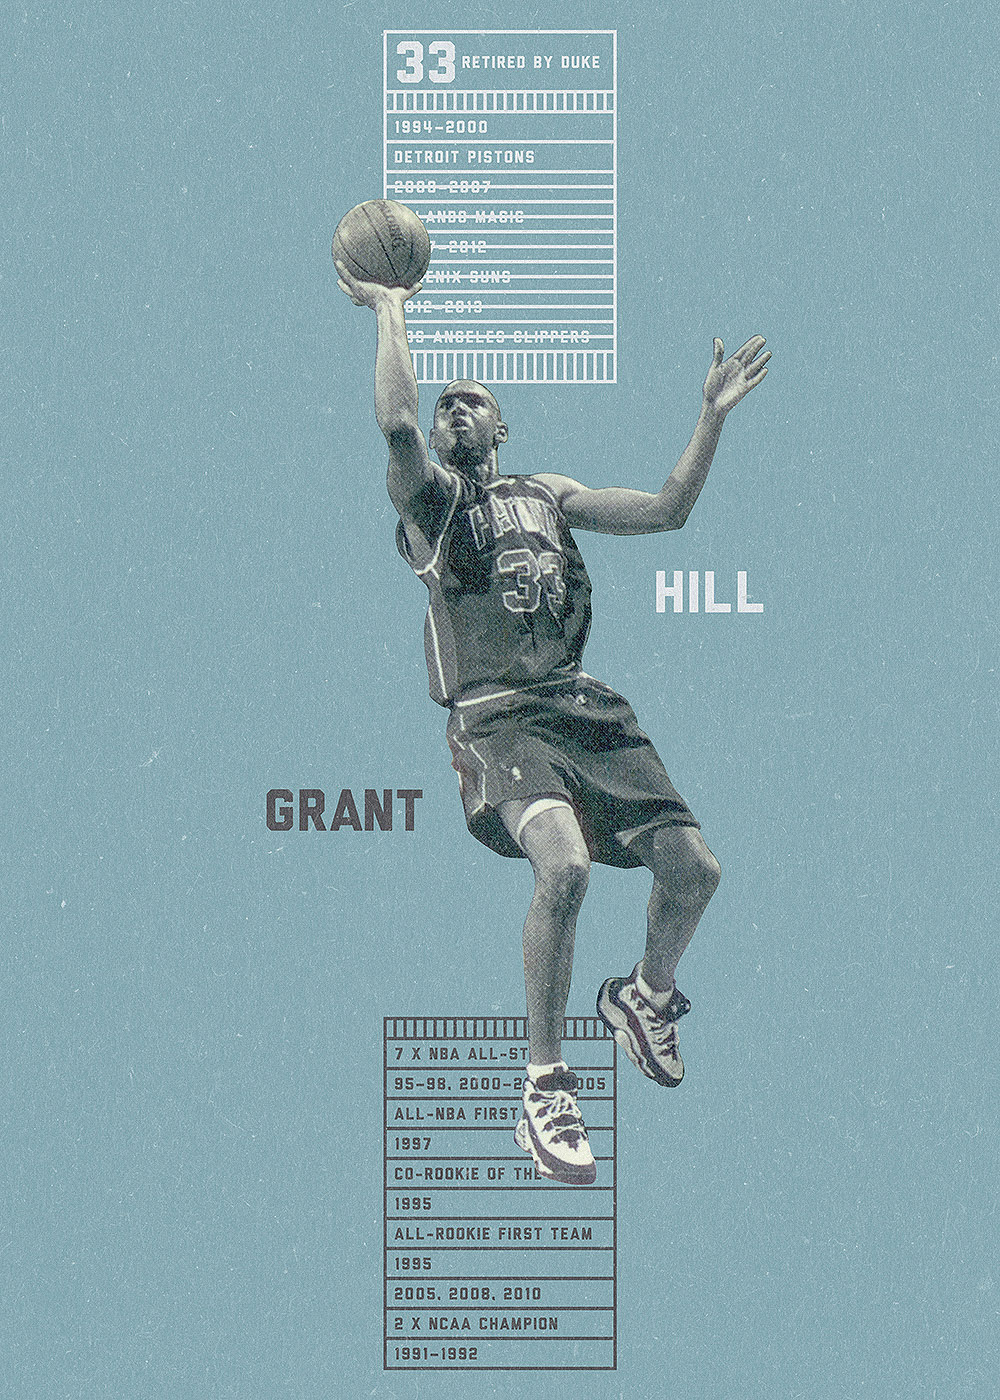 NBA Cards2Posters on Behance